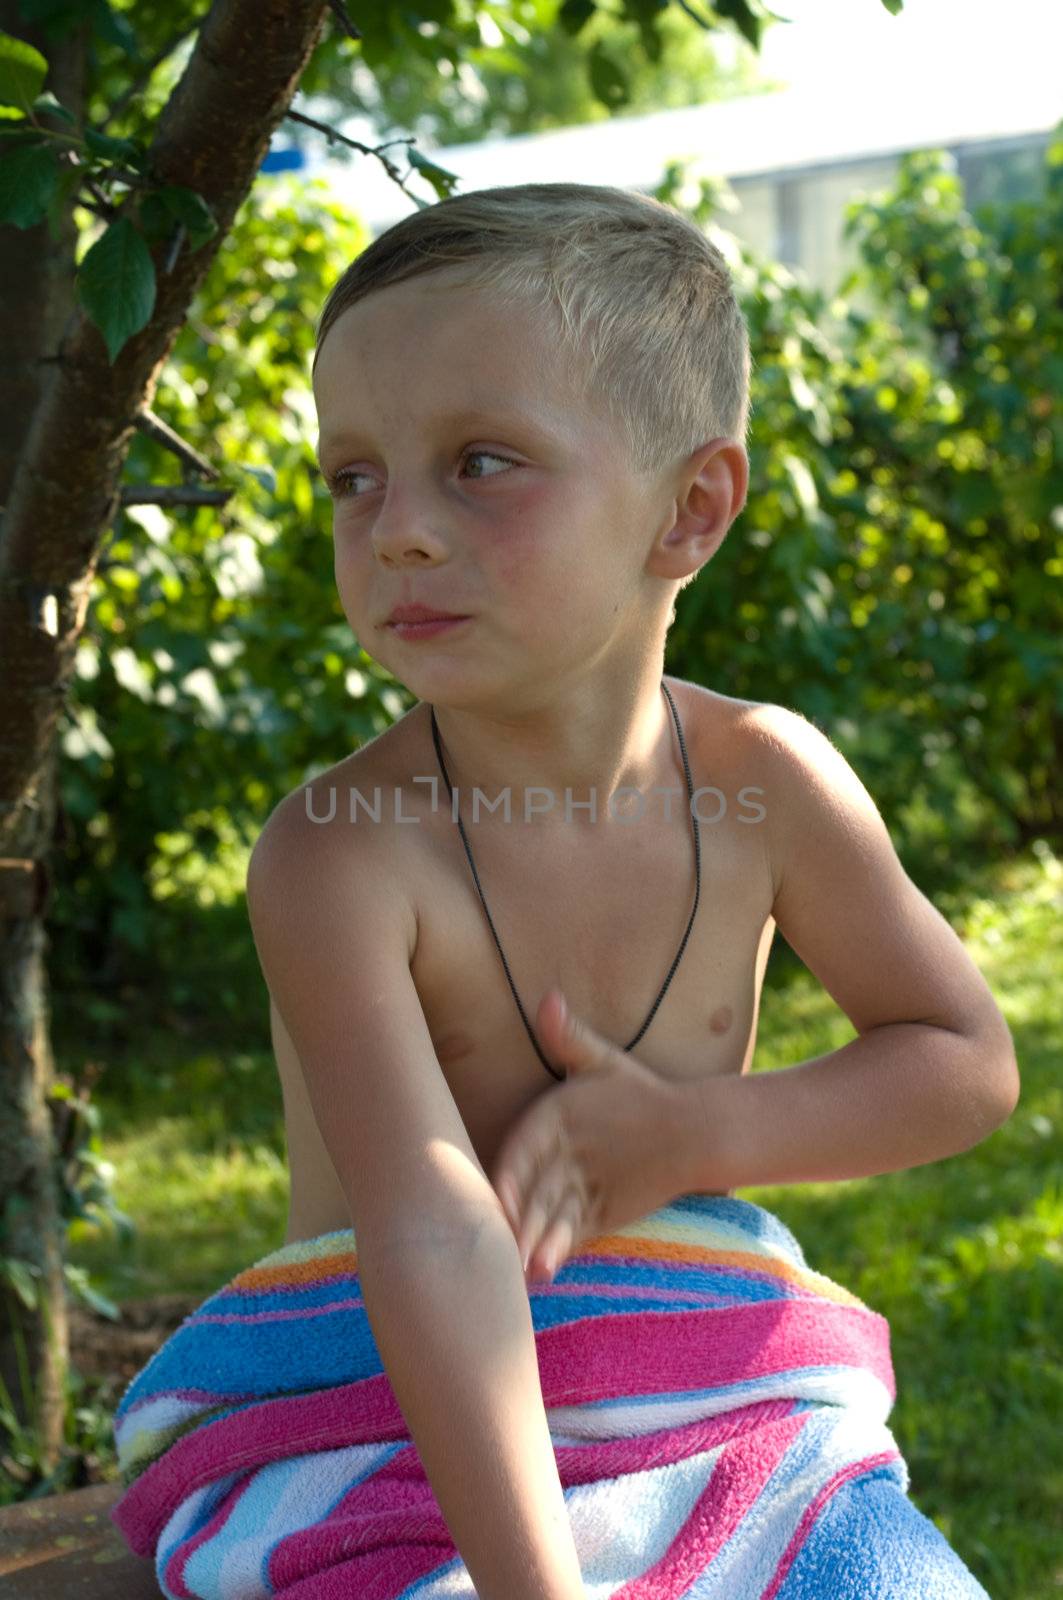 Child sits under a tree turned in  towel in the solar summer evening
